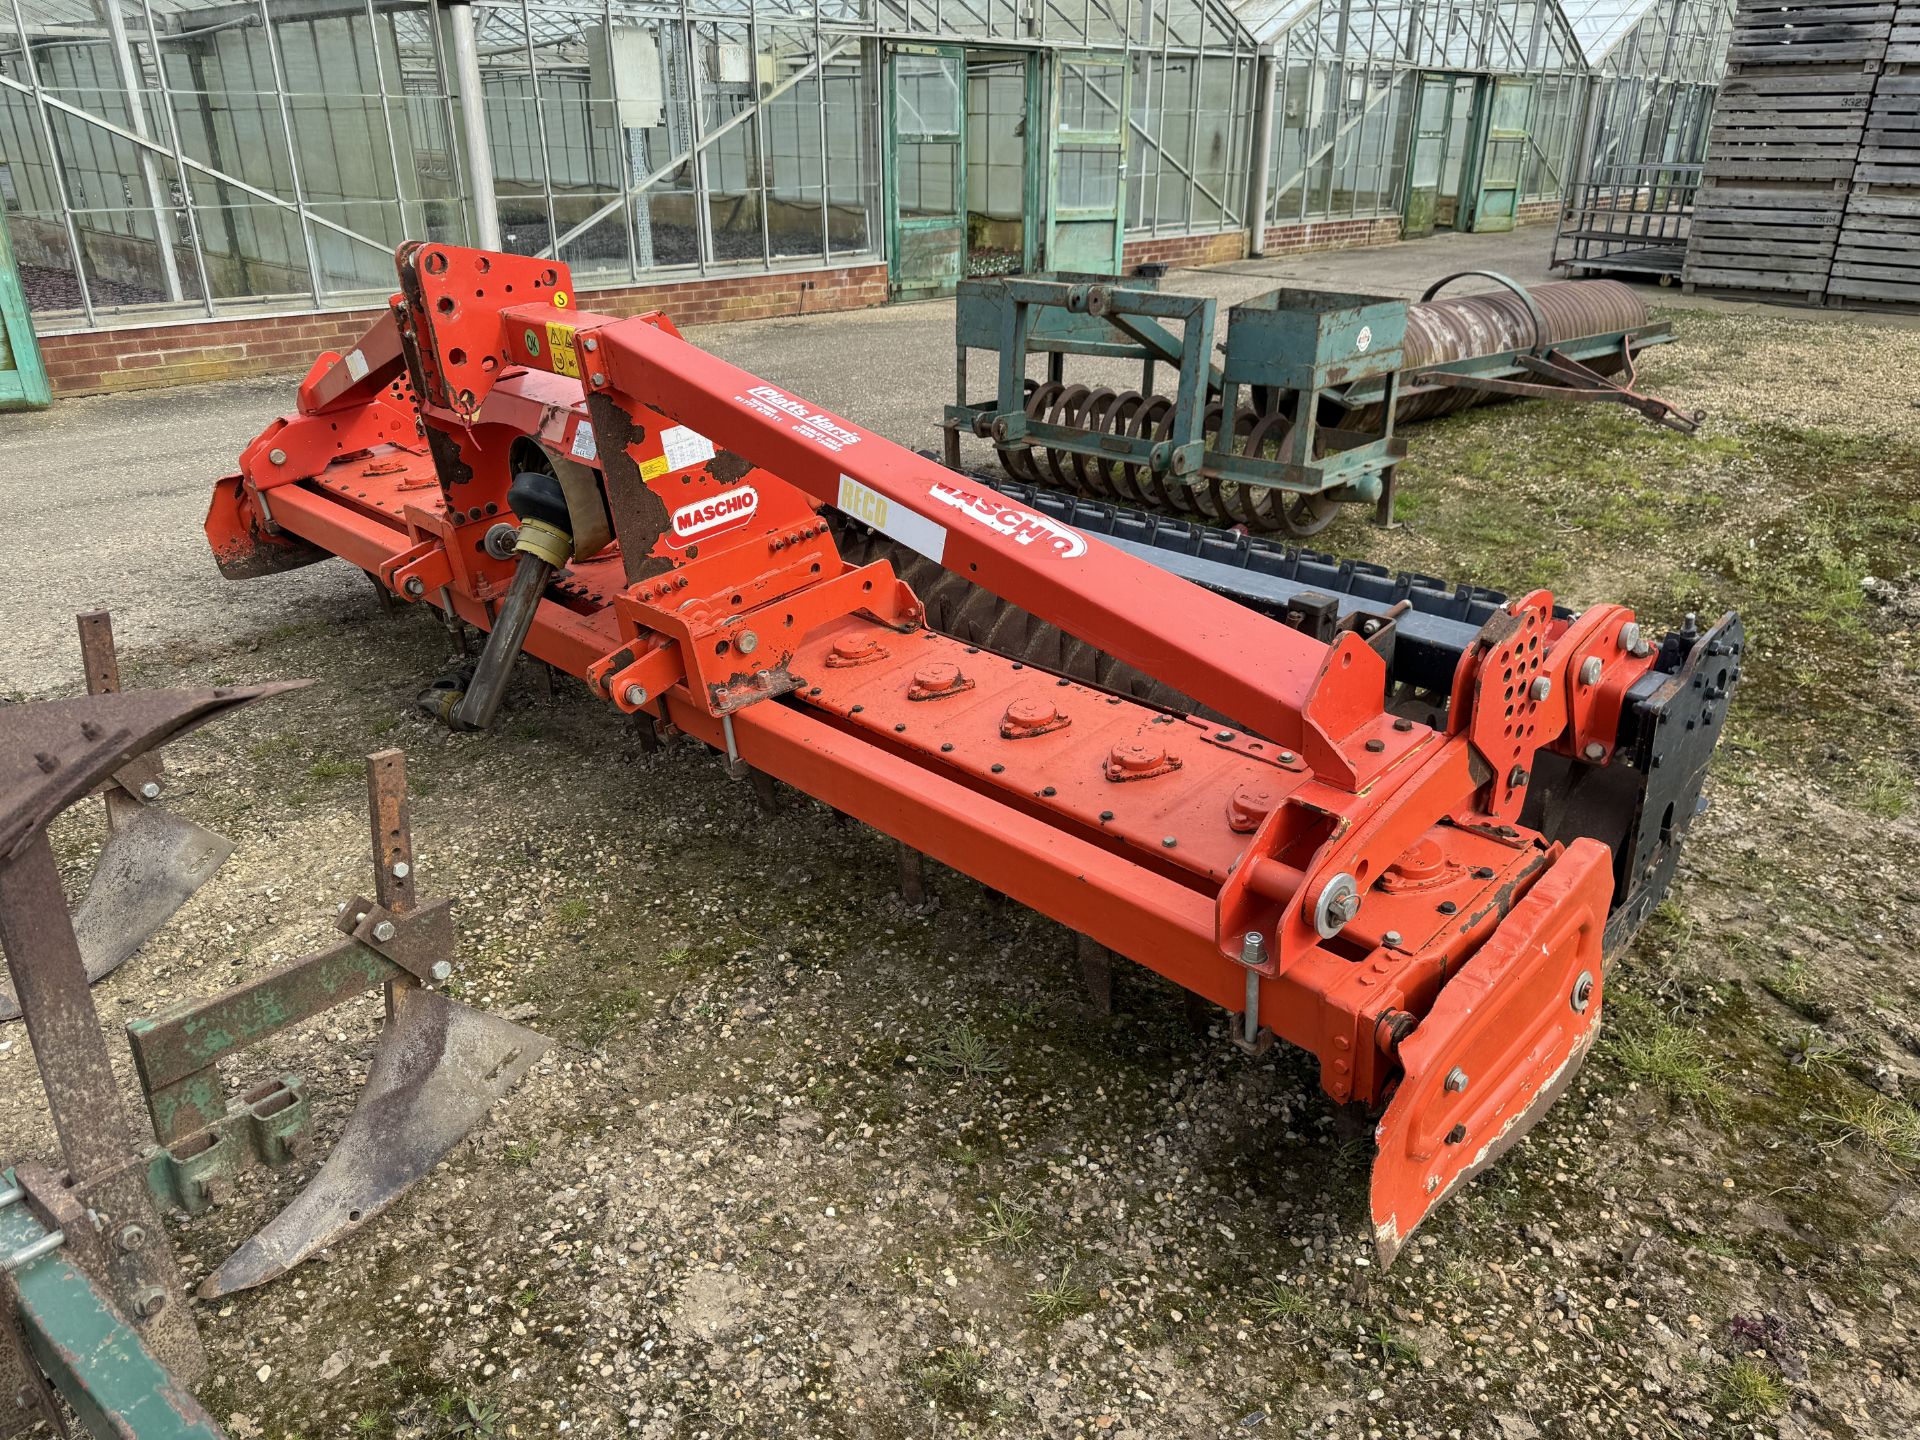 Maschio 4m power harrow, levelling board, tooth packer roller with scrapers serial No 0798P0079,